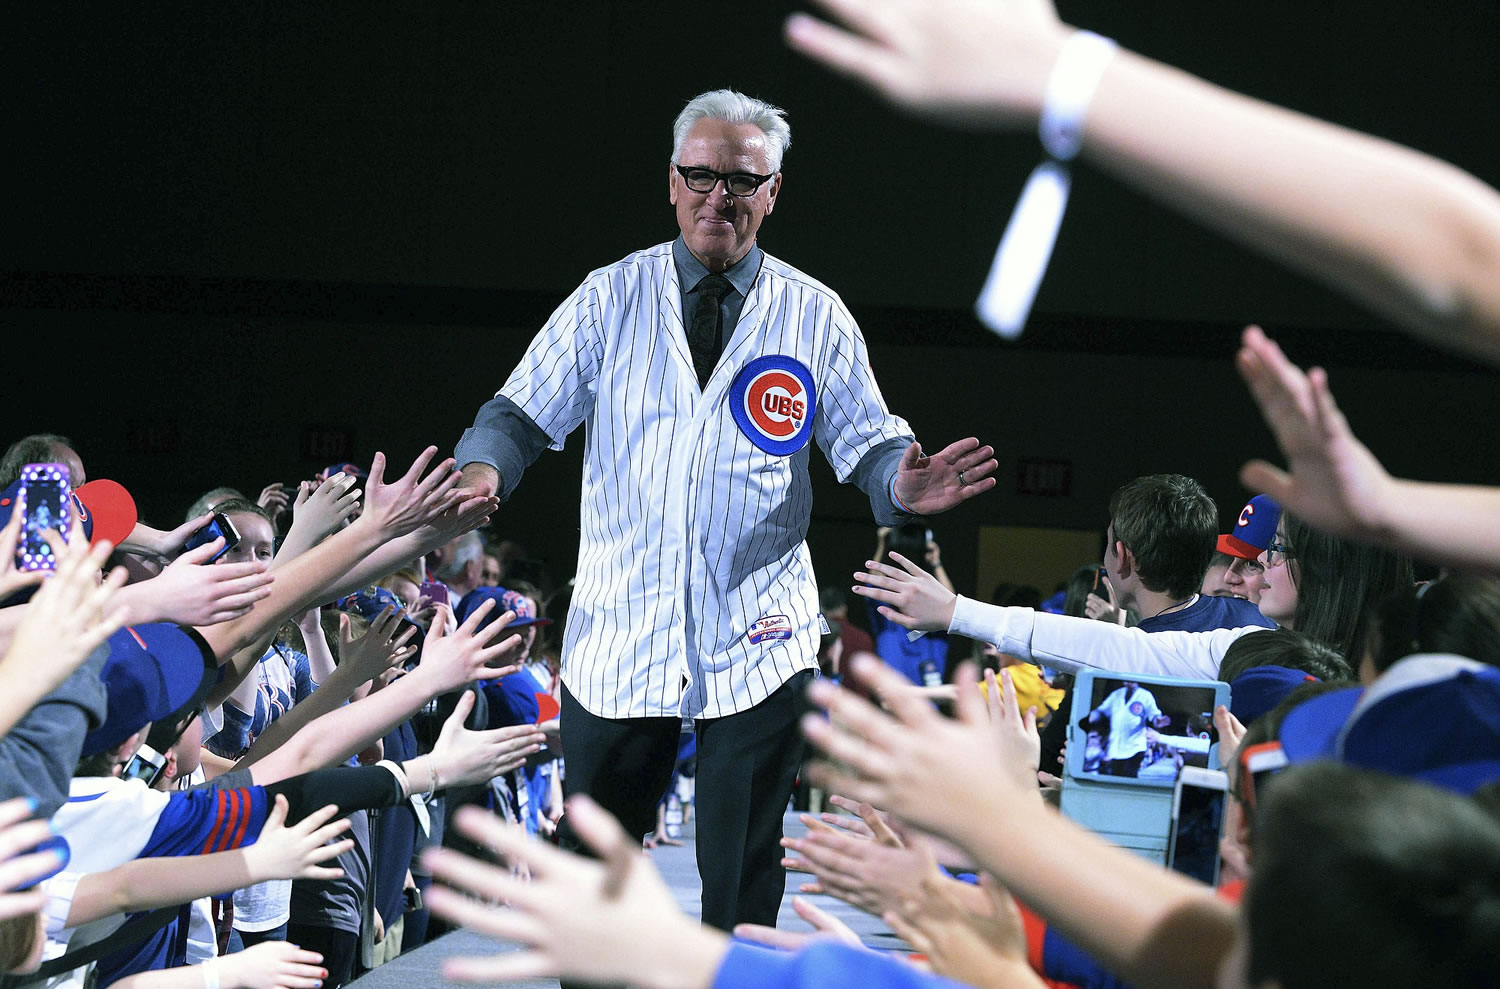 New Chicago Cubs manager Joe Maddon greets the fans during opening night of the annual Cubs Convention, Friday, Jan. 16, 2015 in Chicago.